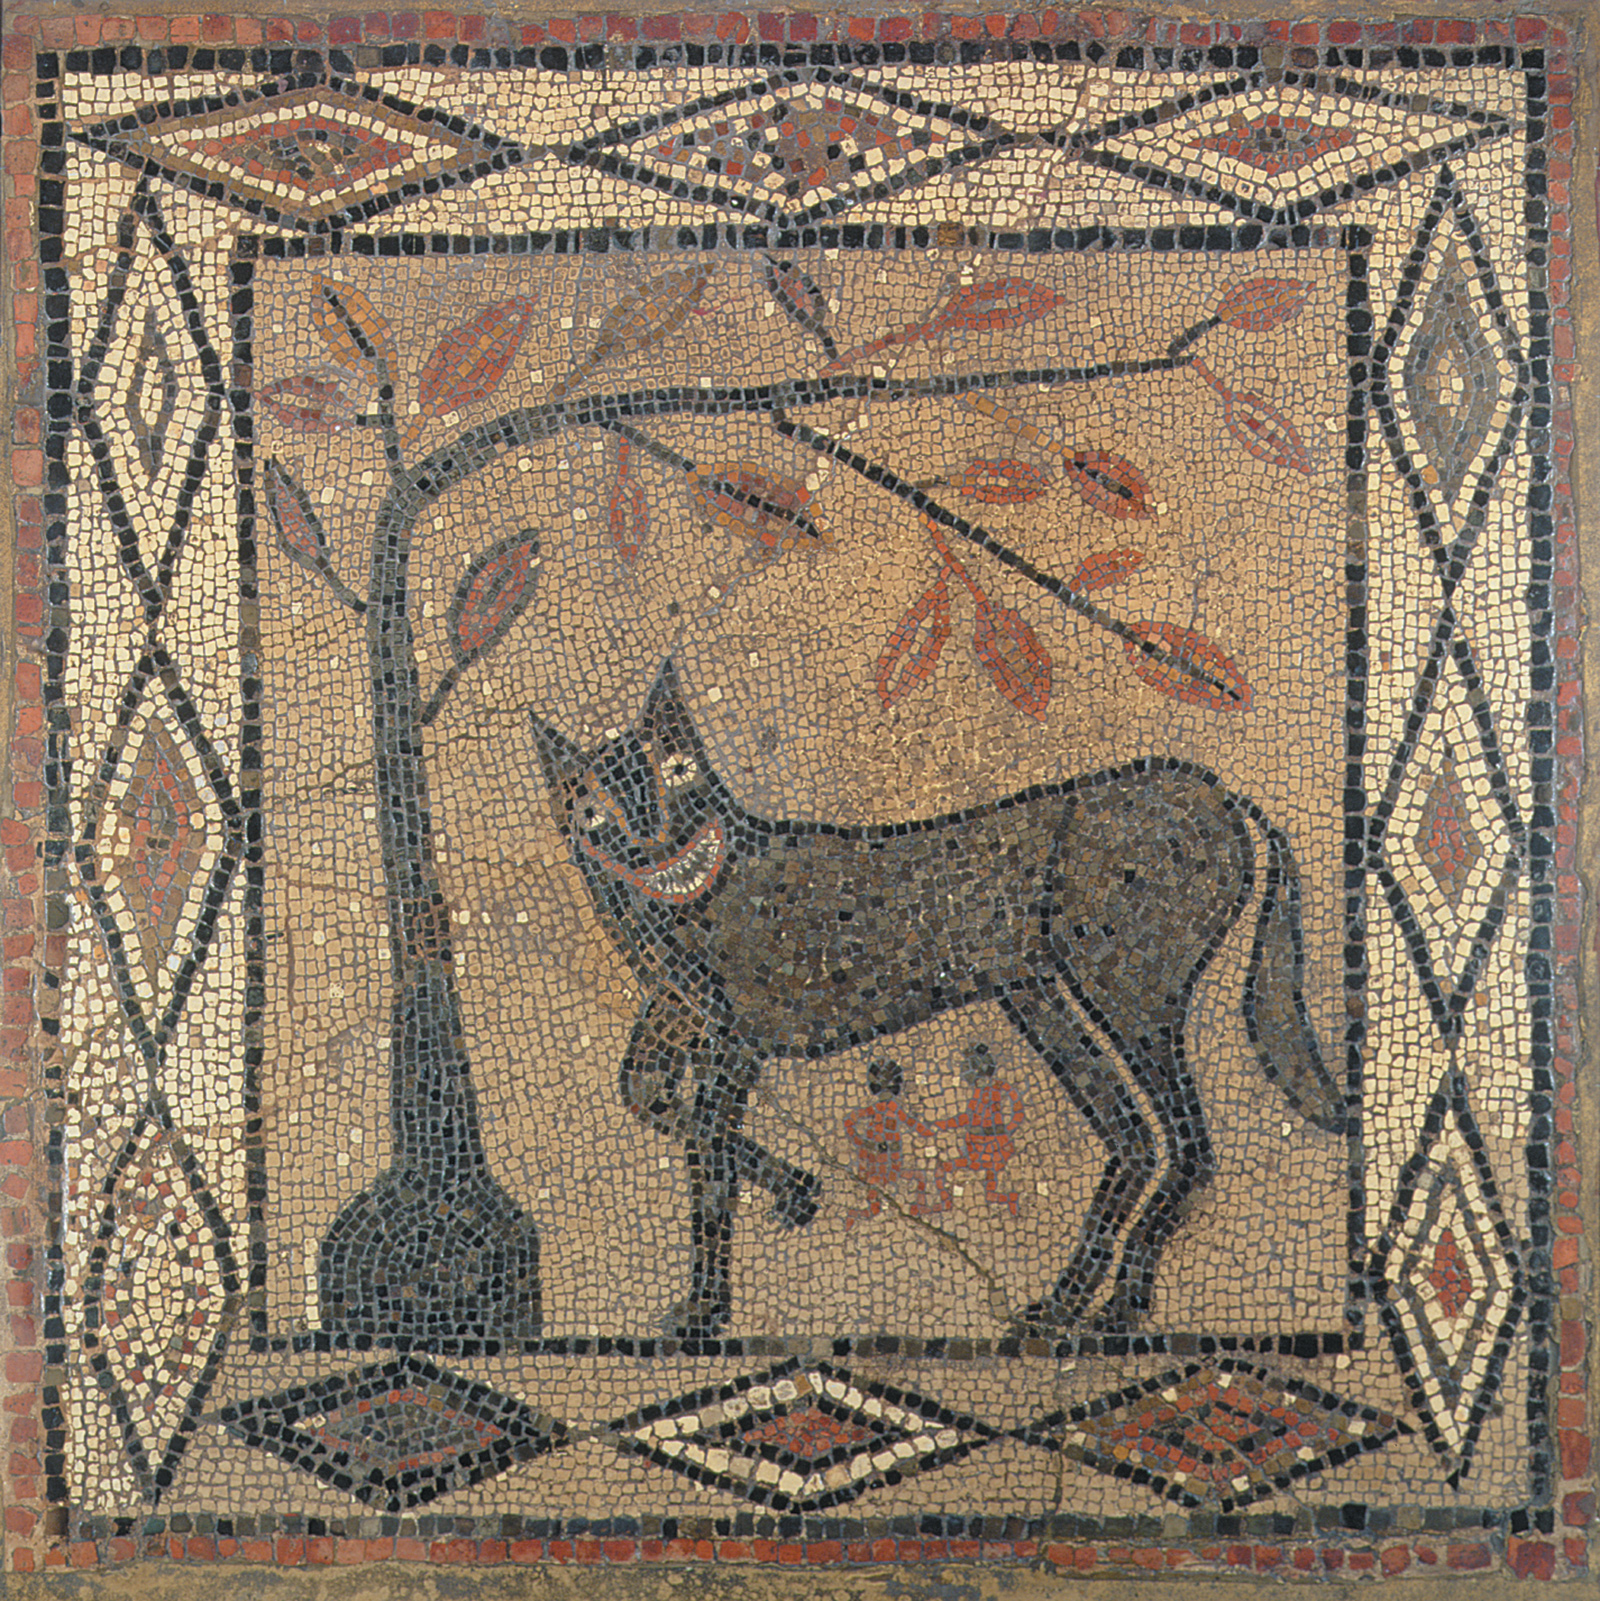 A mosaic of the wolf suckling Romulus and Remus, the twin founders of Rome, from the Roman fortress site at Aldborough near Leeds, circa 300 CE